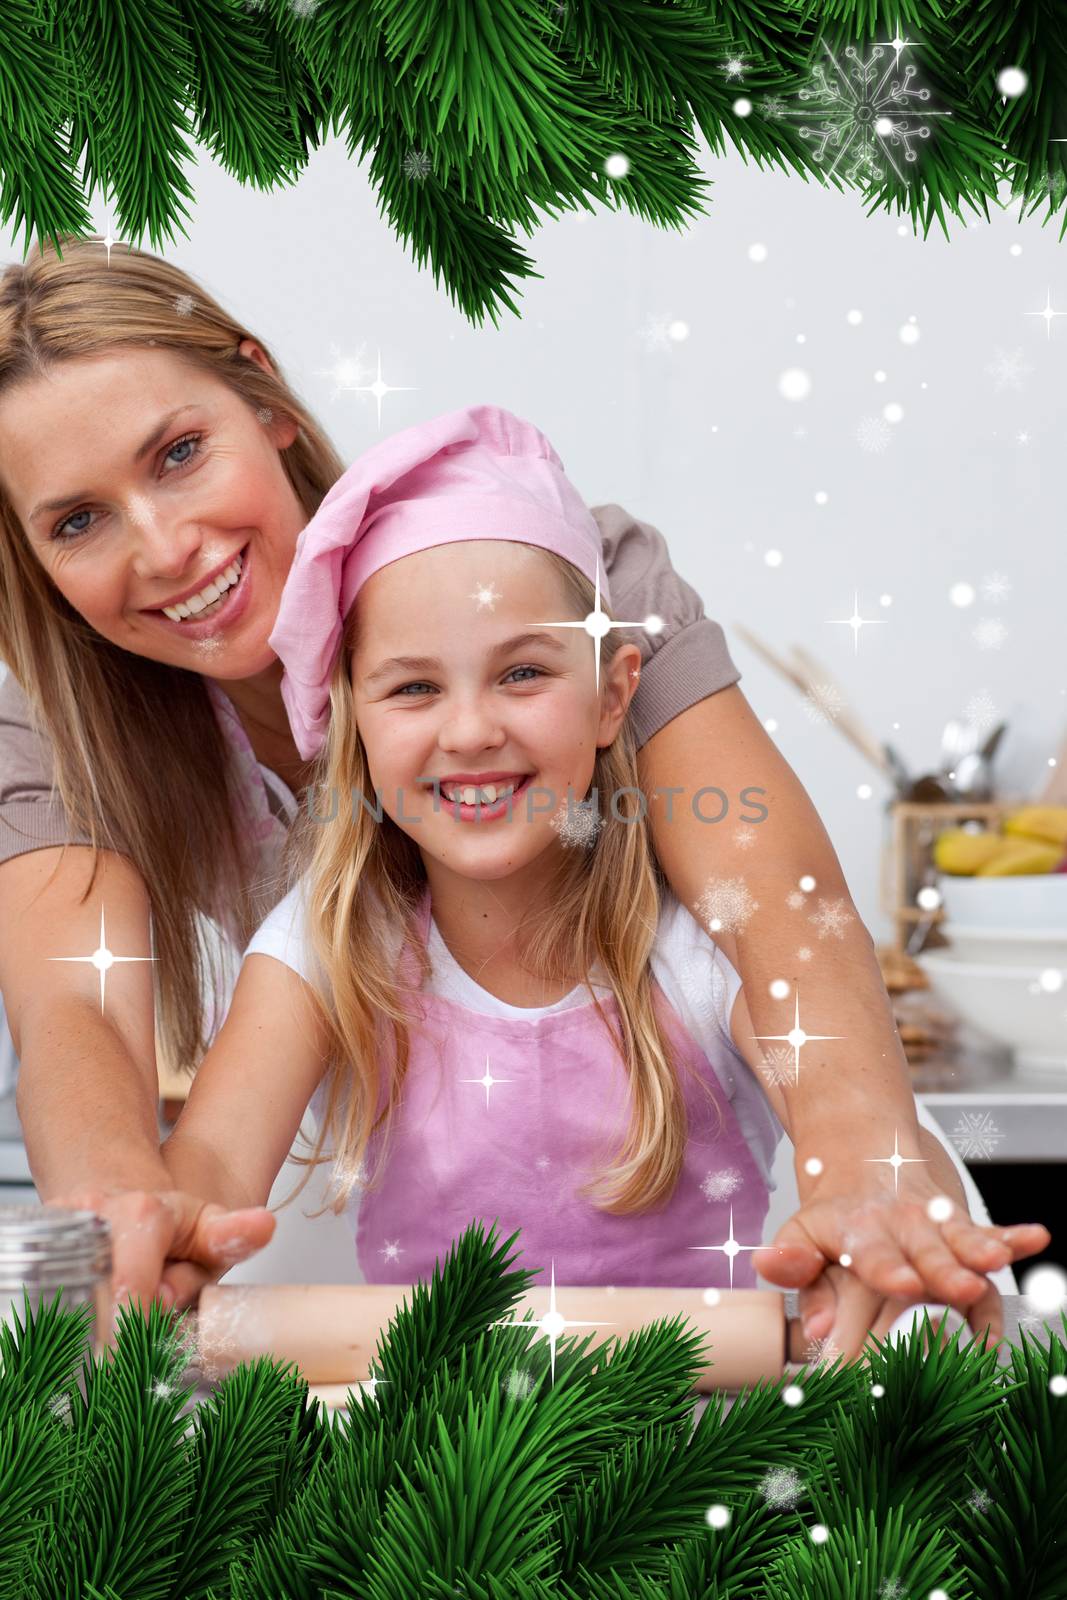 Composite image of a Mother and daughter baking Christmas cookies in the kitchen against snow falling